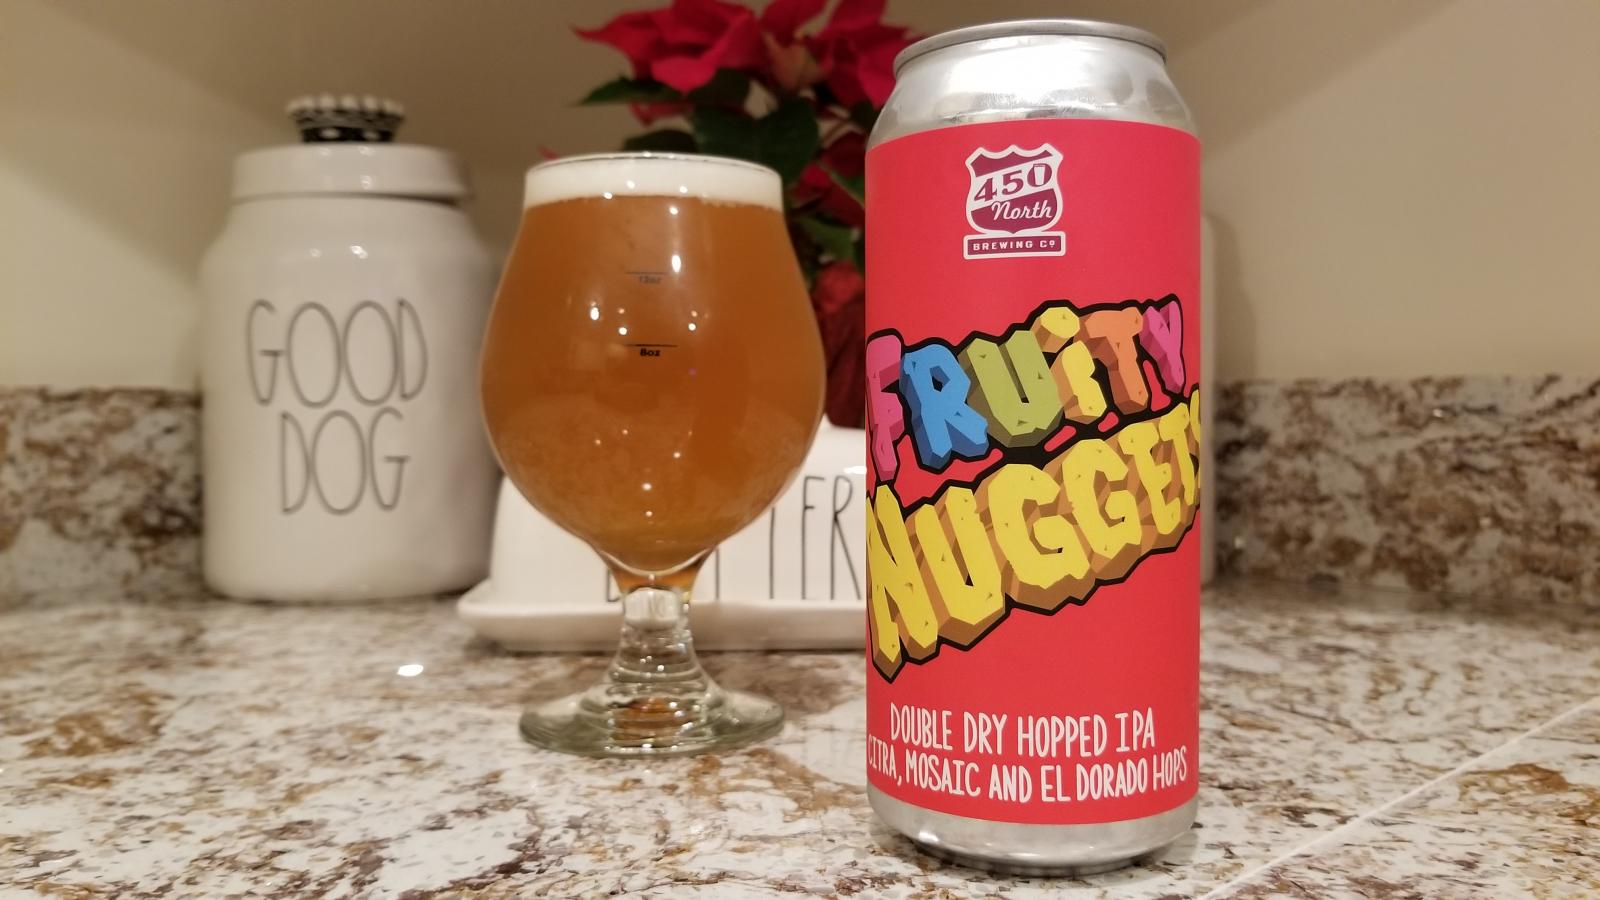 Fruity Nuggets